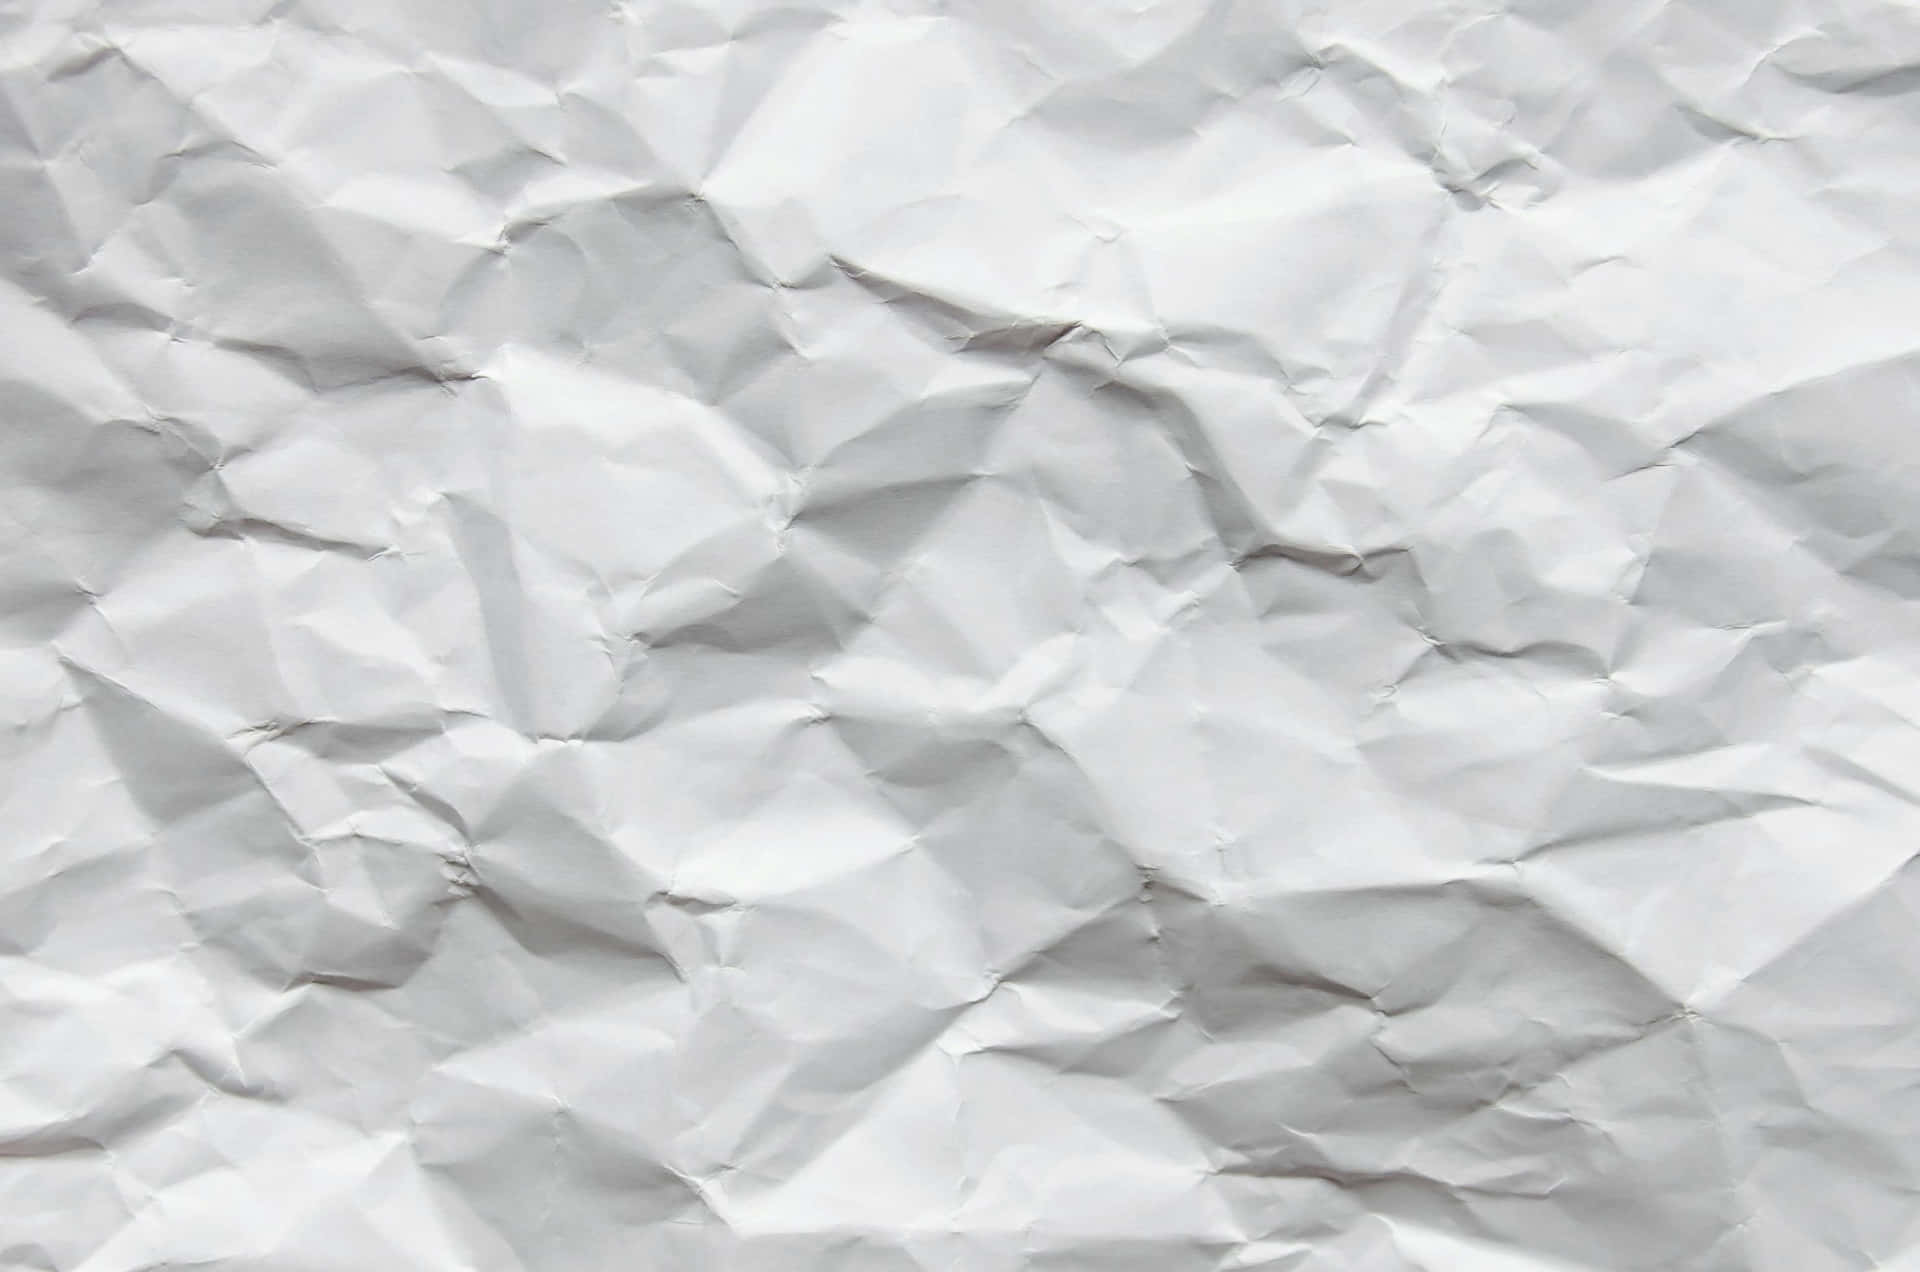 Untidy Folds Paper Background Wallpaper